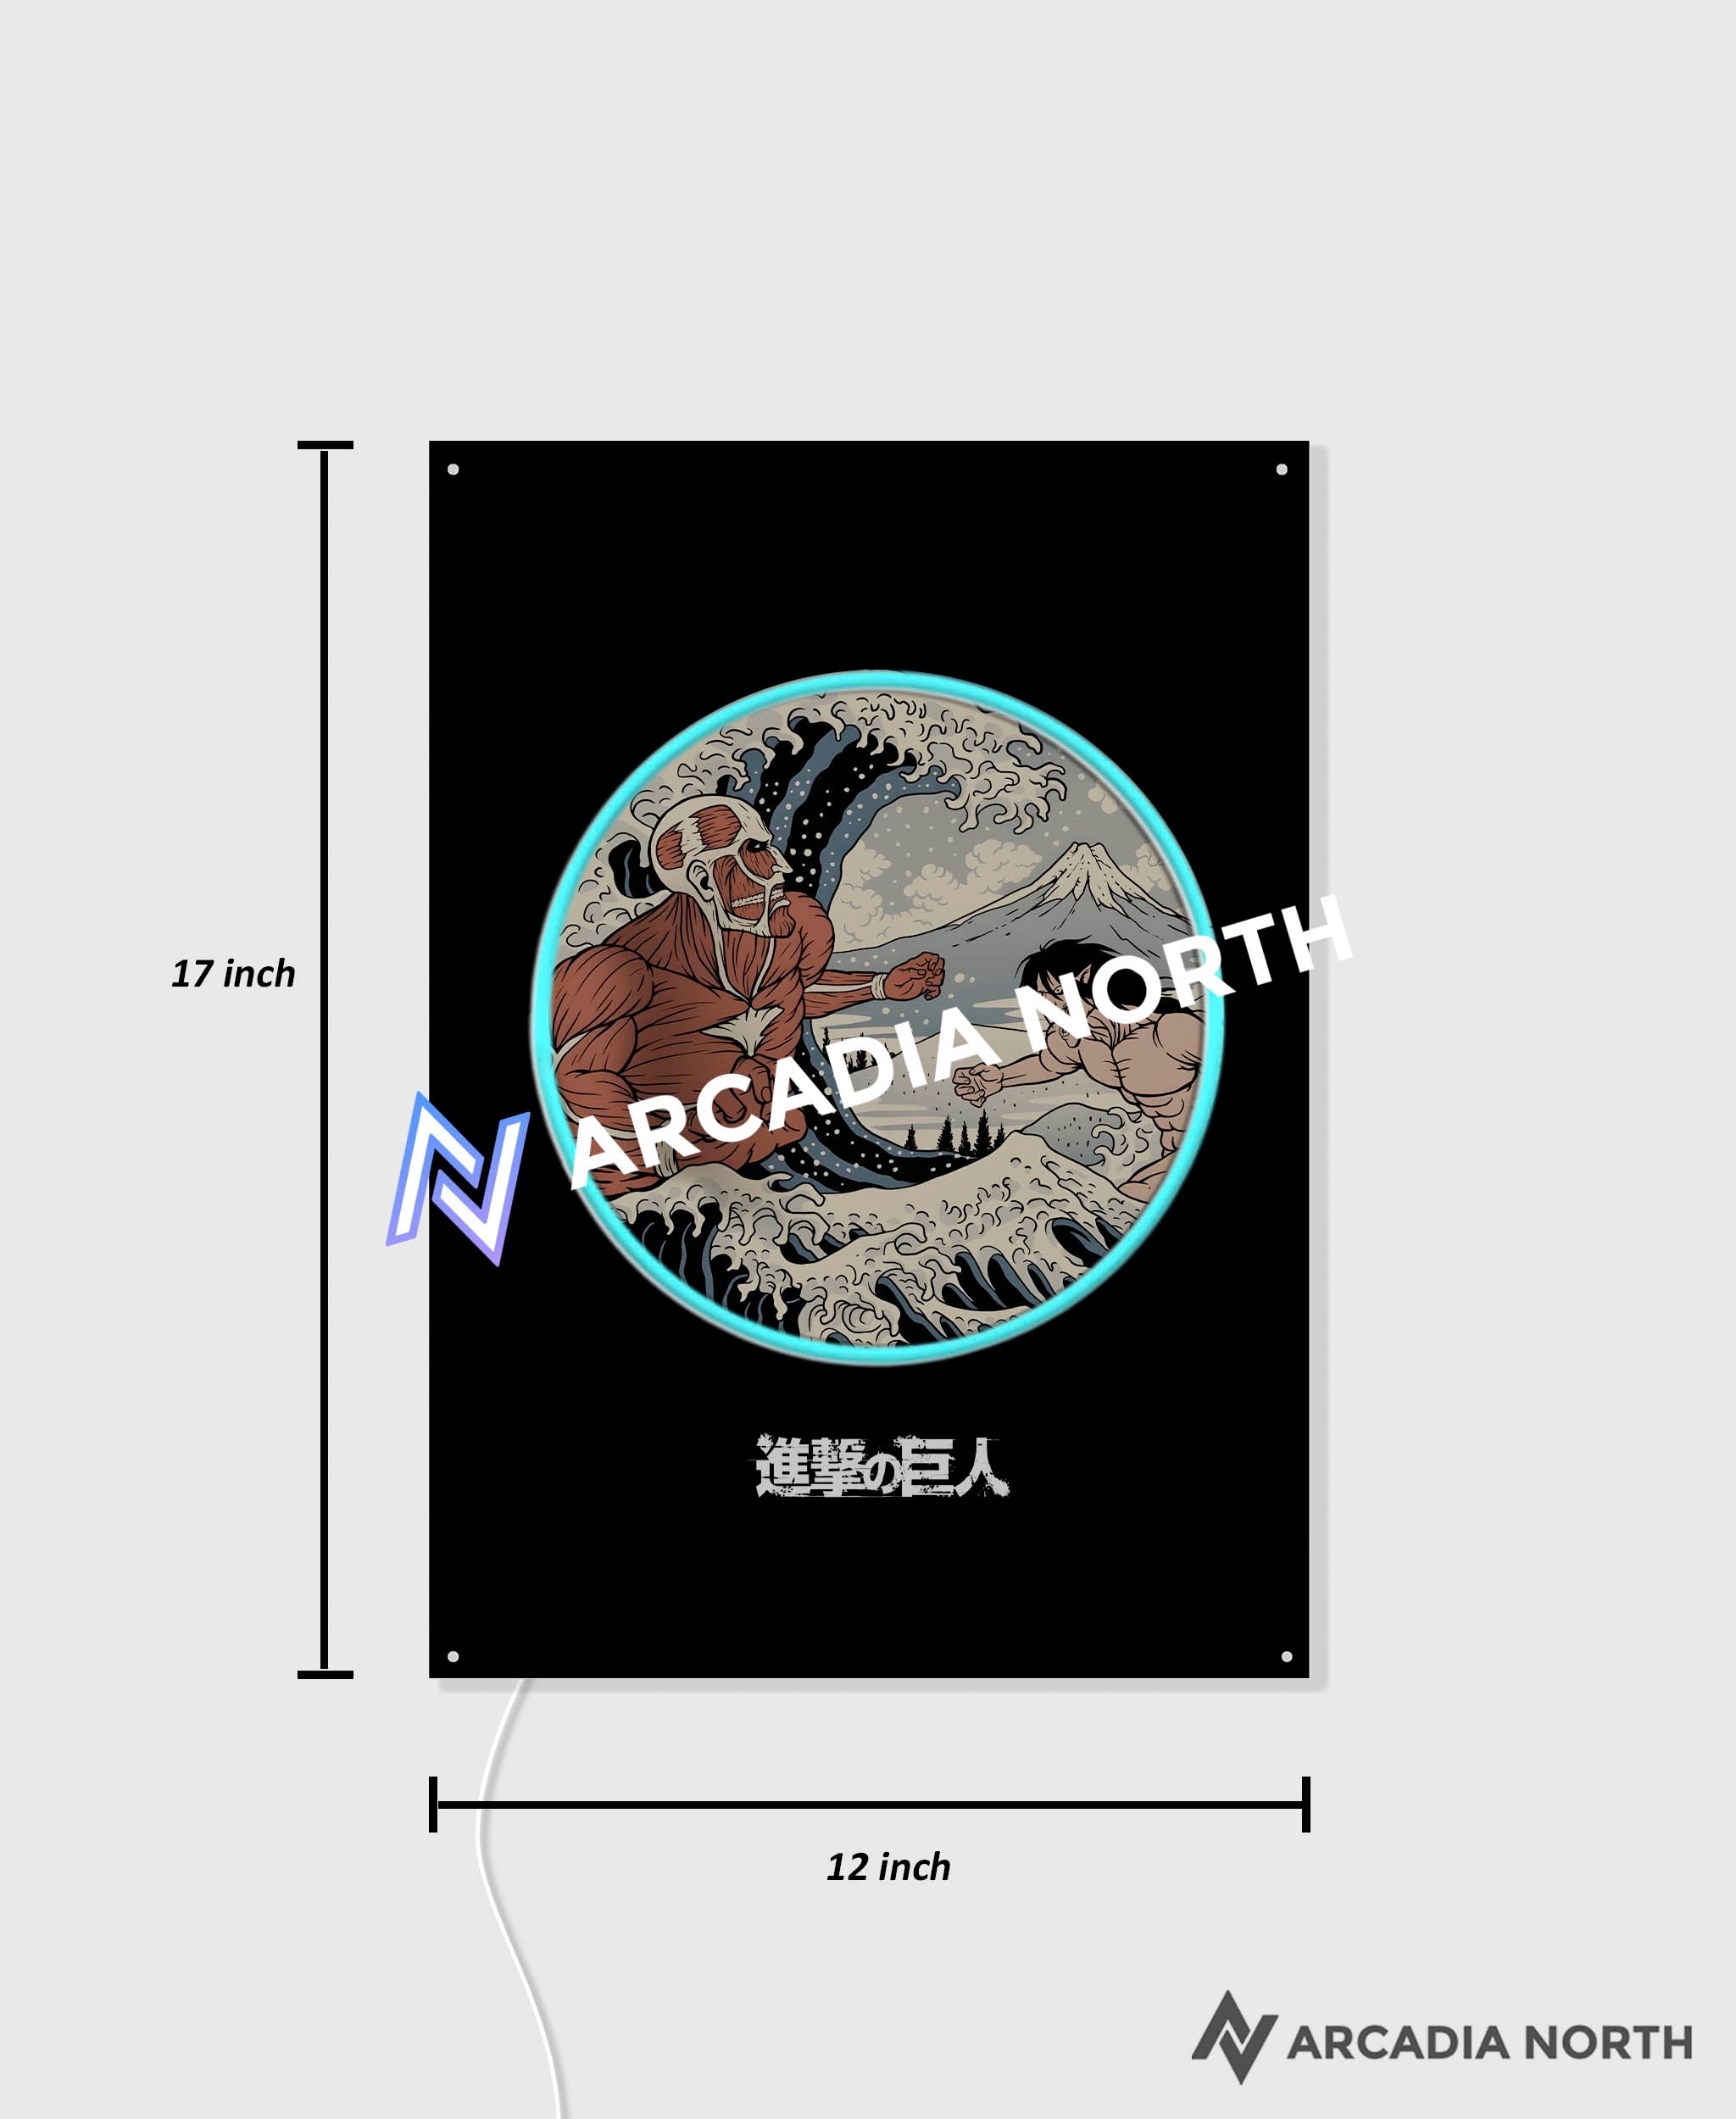 Arcadia North AURALIGHT Original LED Poster featuring the anime Attack on Titan drawn in ukiyo-e style based on The Great Wave off Kanagawa by Hokusai. UV-printed poster on acrylic and illuminated by neon LED lights.